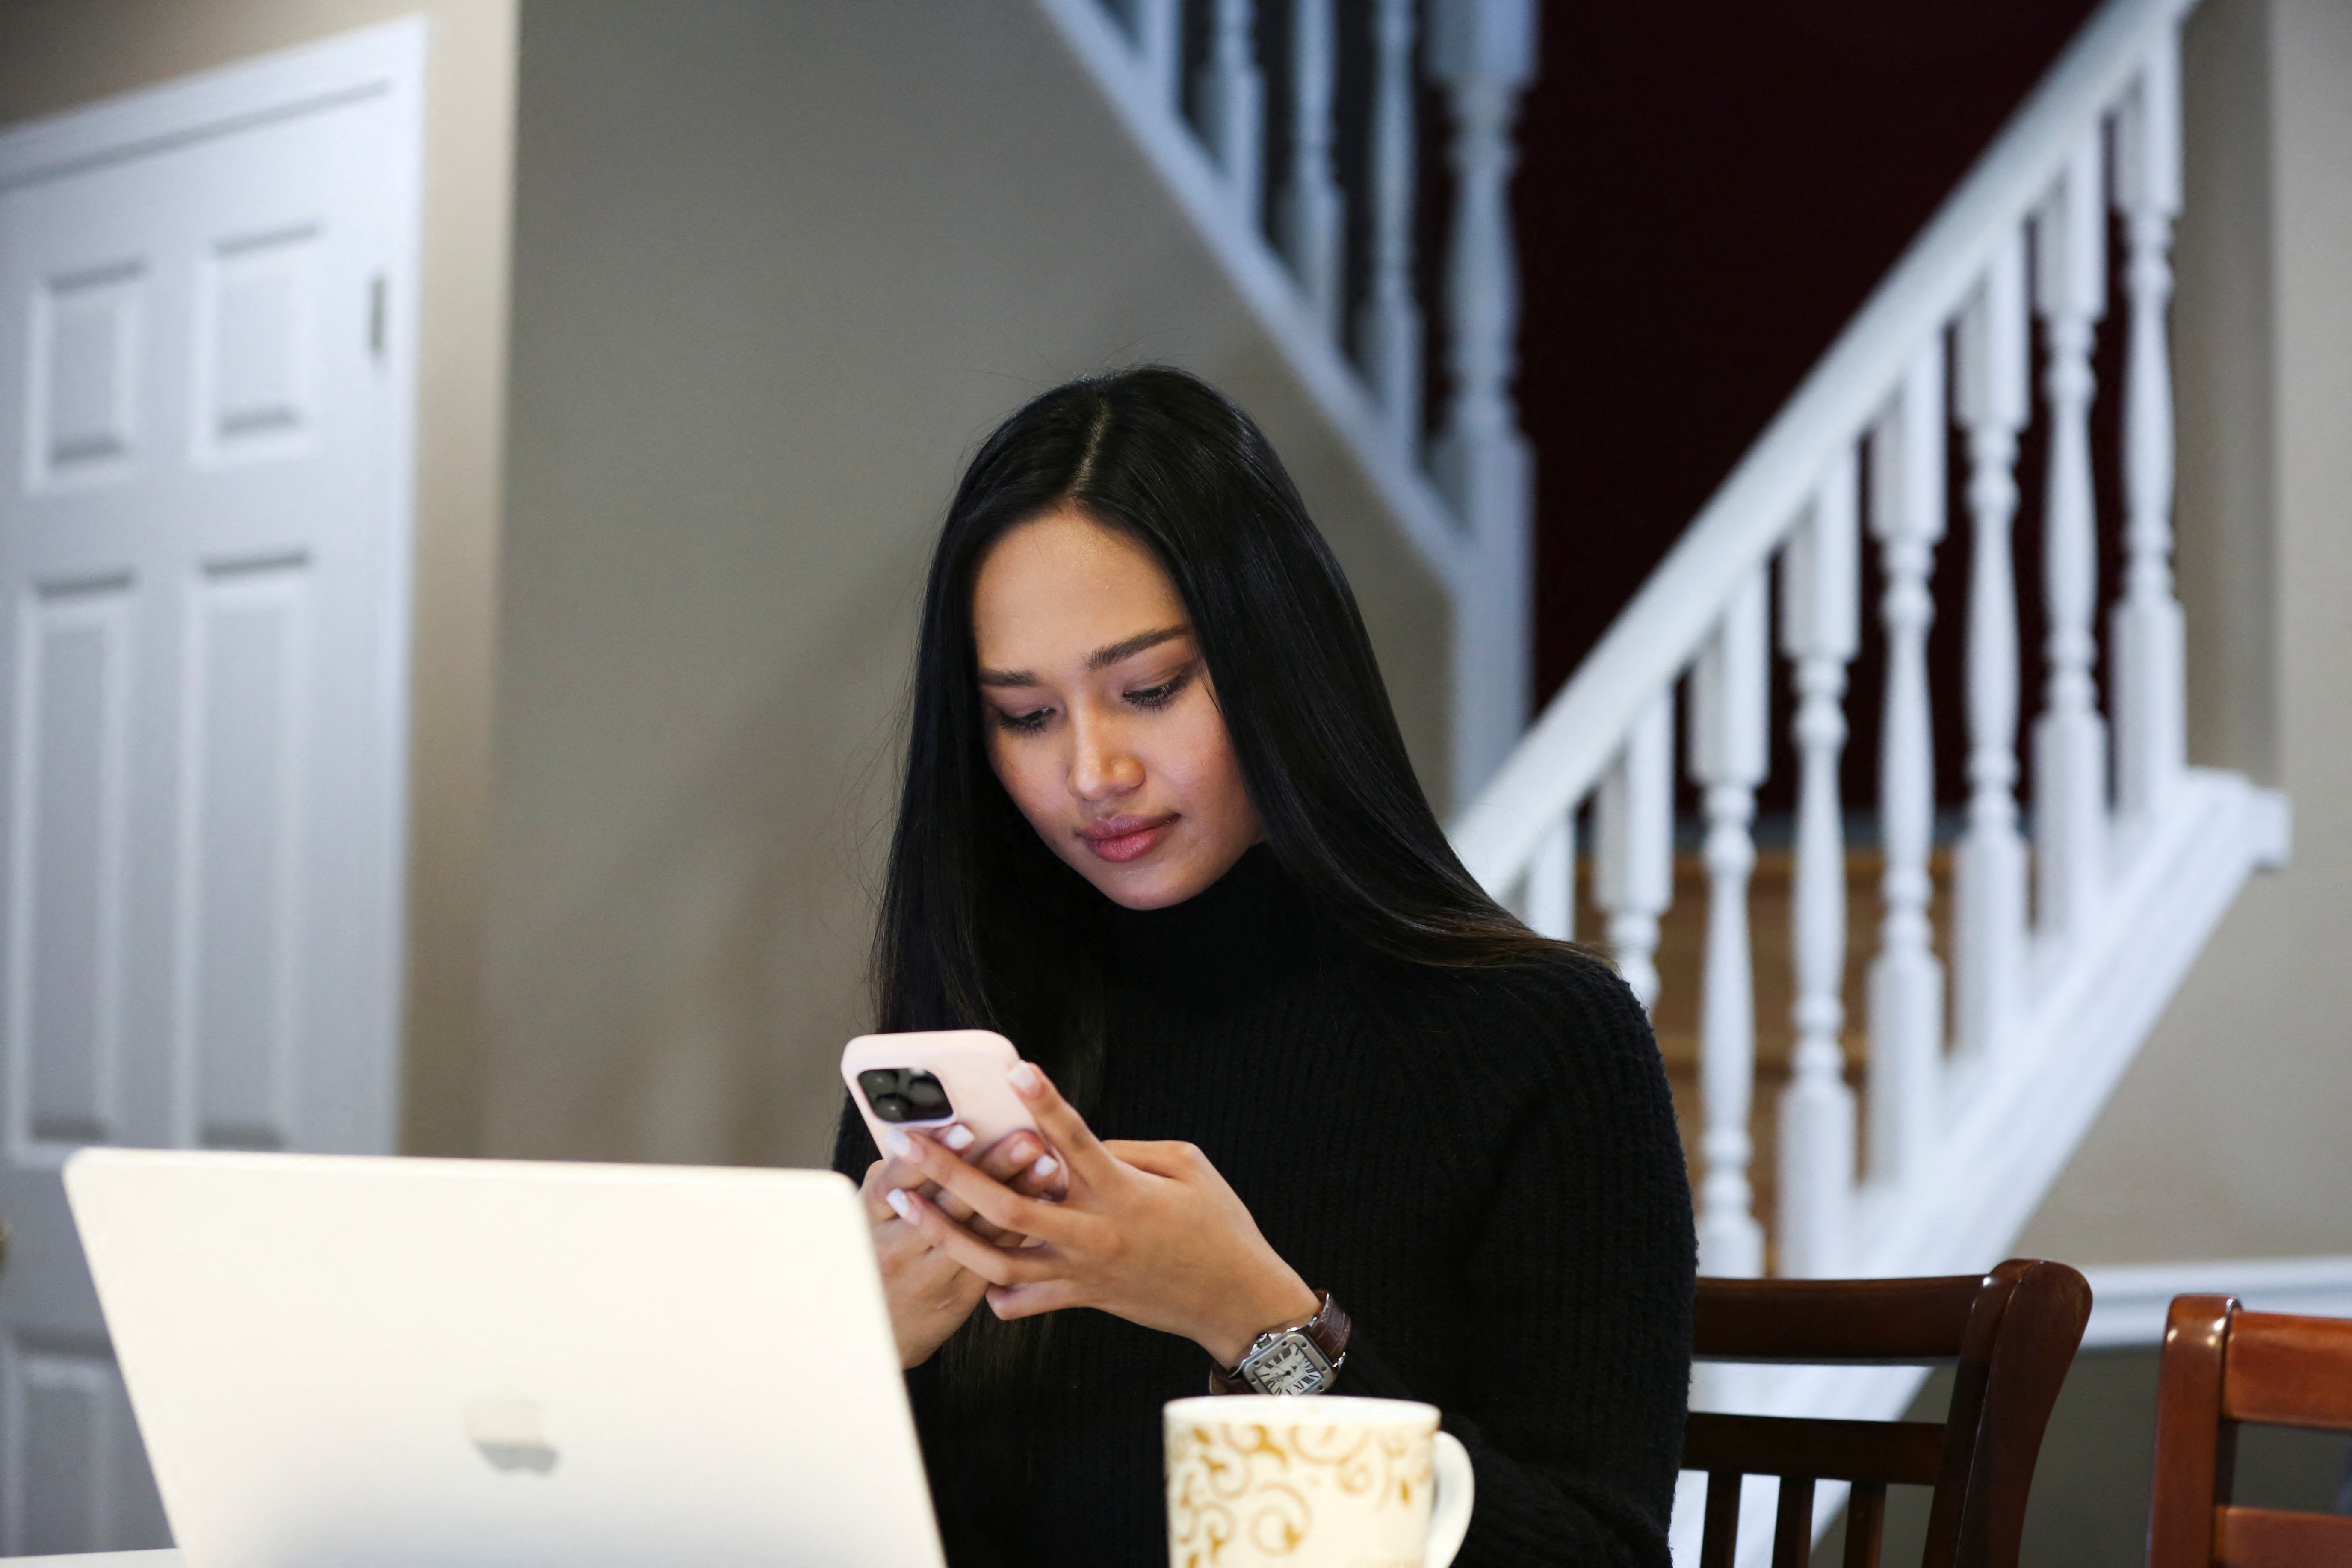 Myanmar's beauty queen Han Lay, who had been exiled after speaking out against military rule in her country, uses her phone while working at her house in London